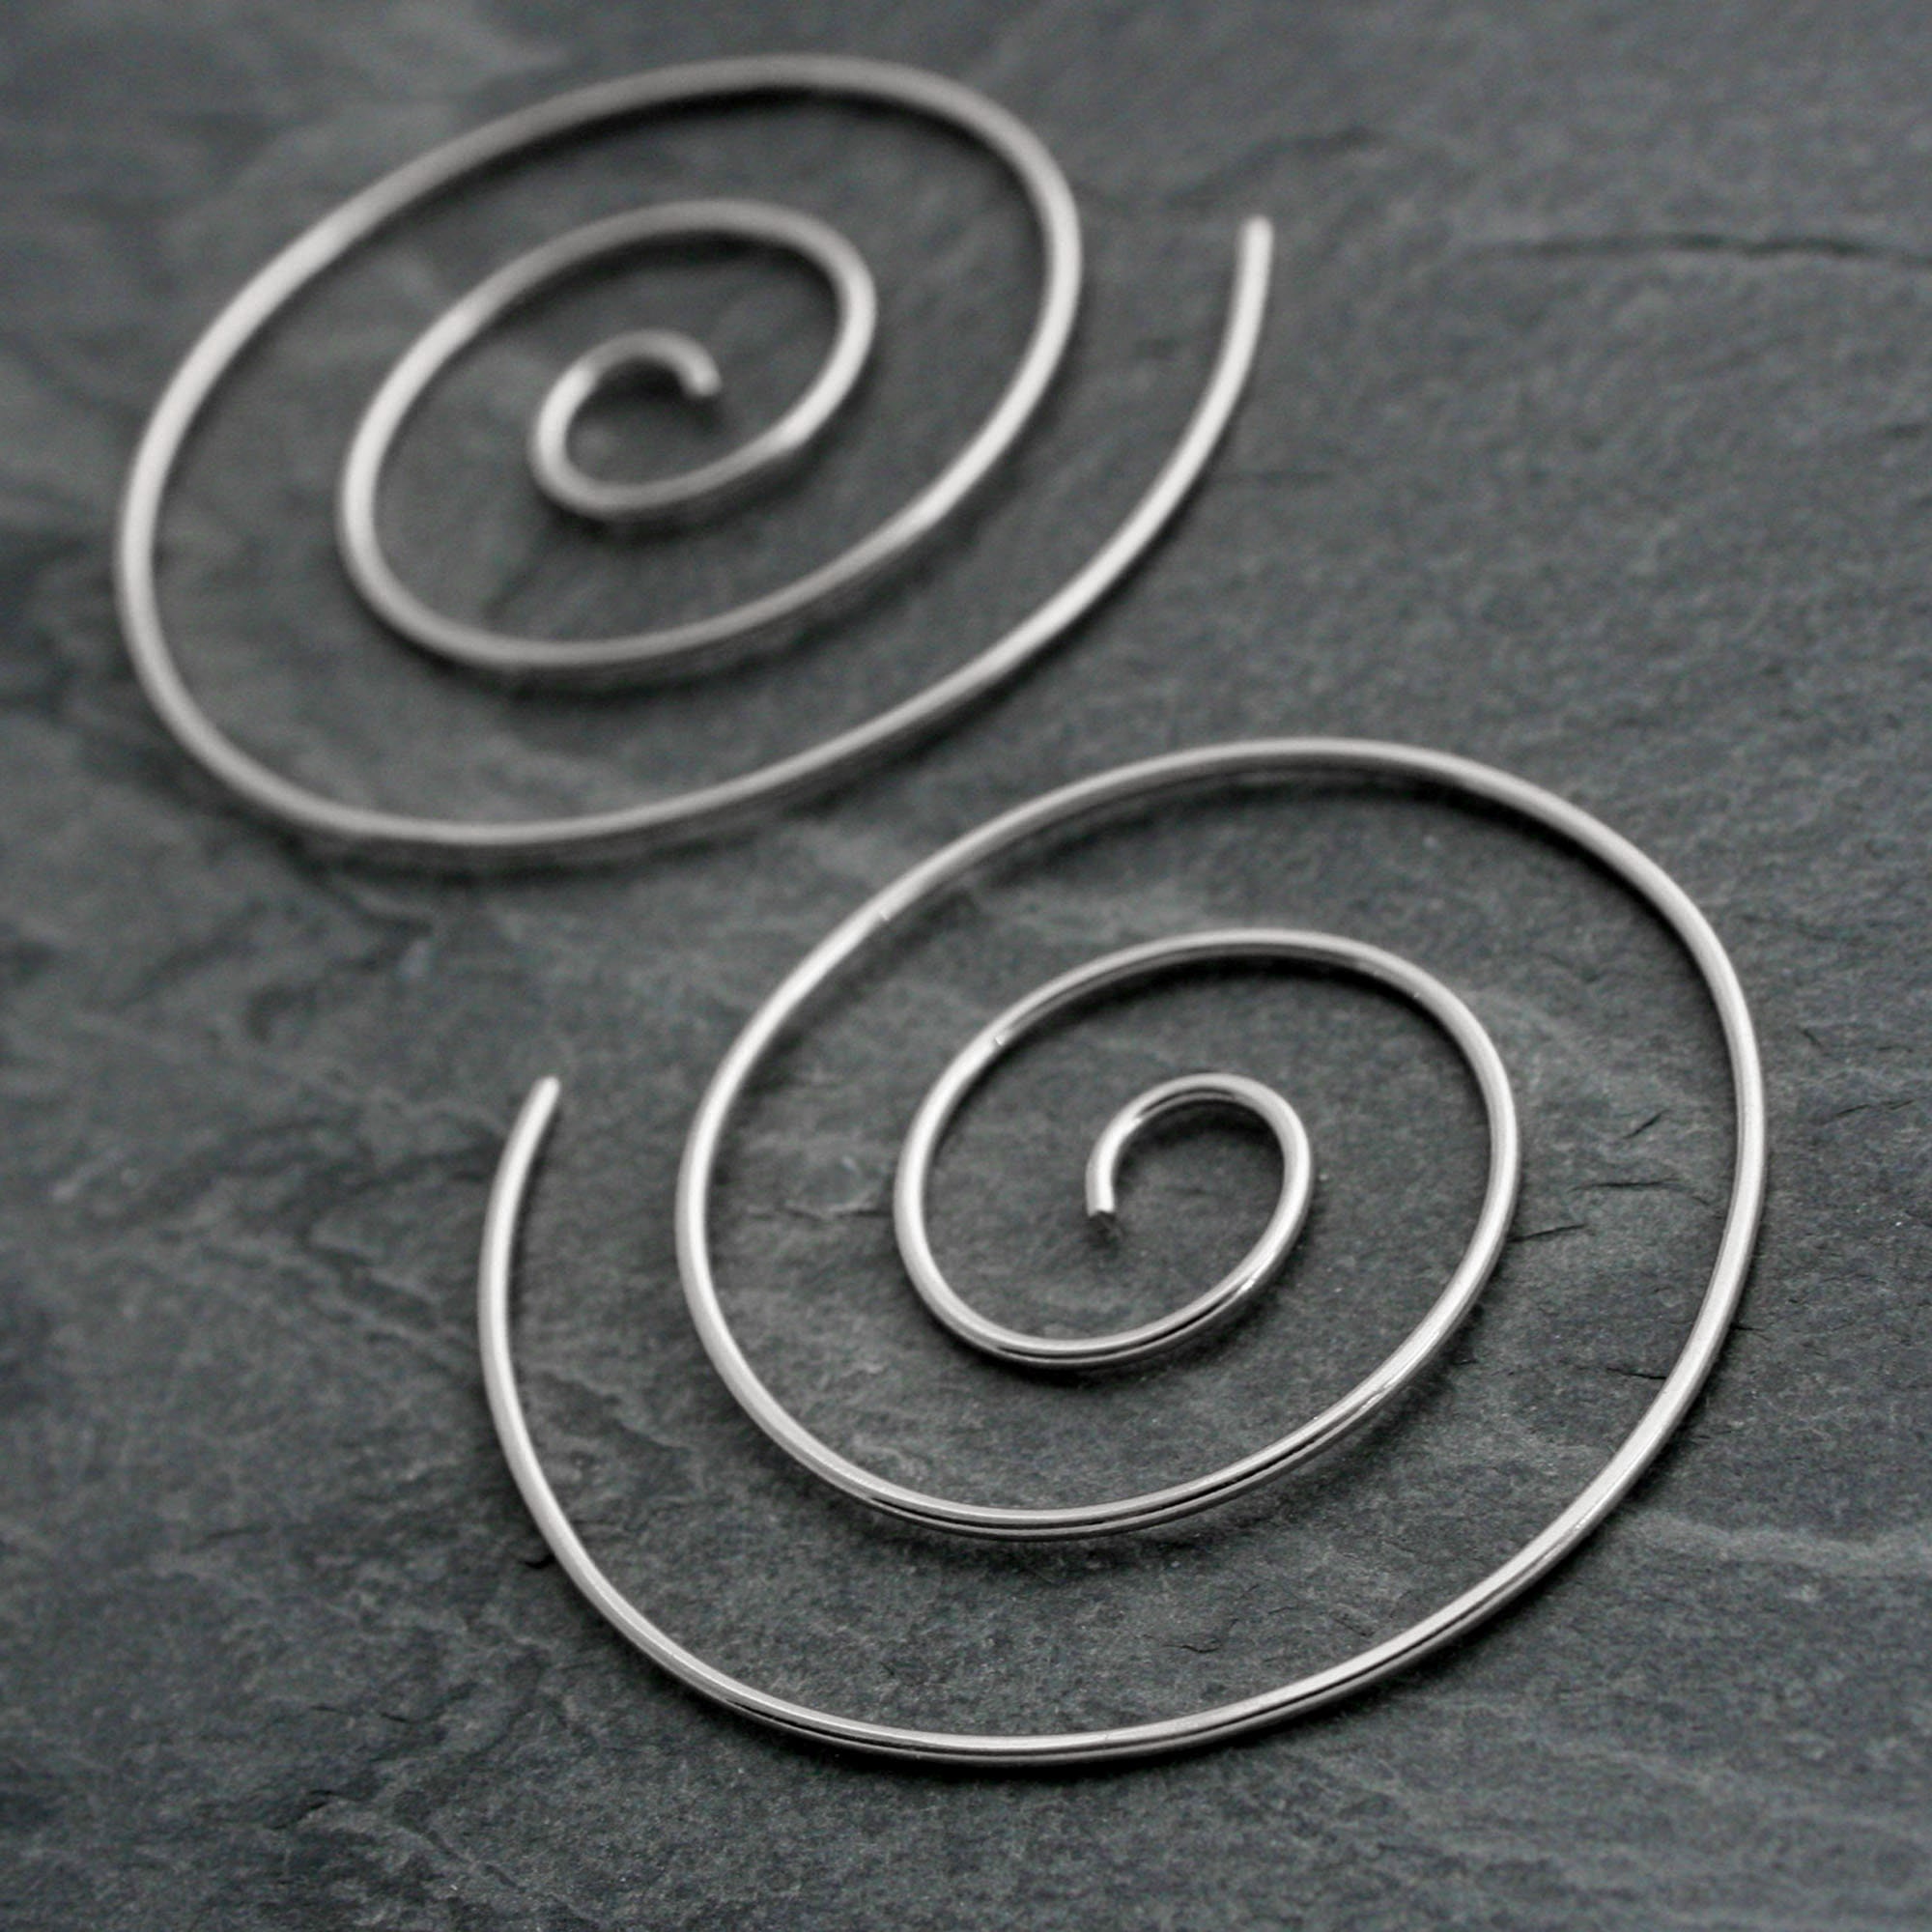 Spiral Earrings Solid Sterling Silver Size Large Nautilus | Etsy